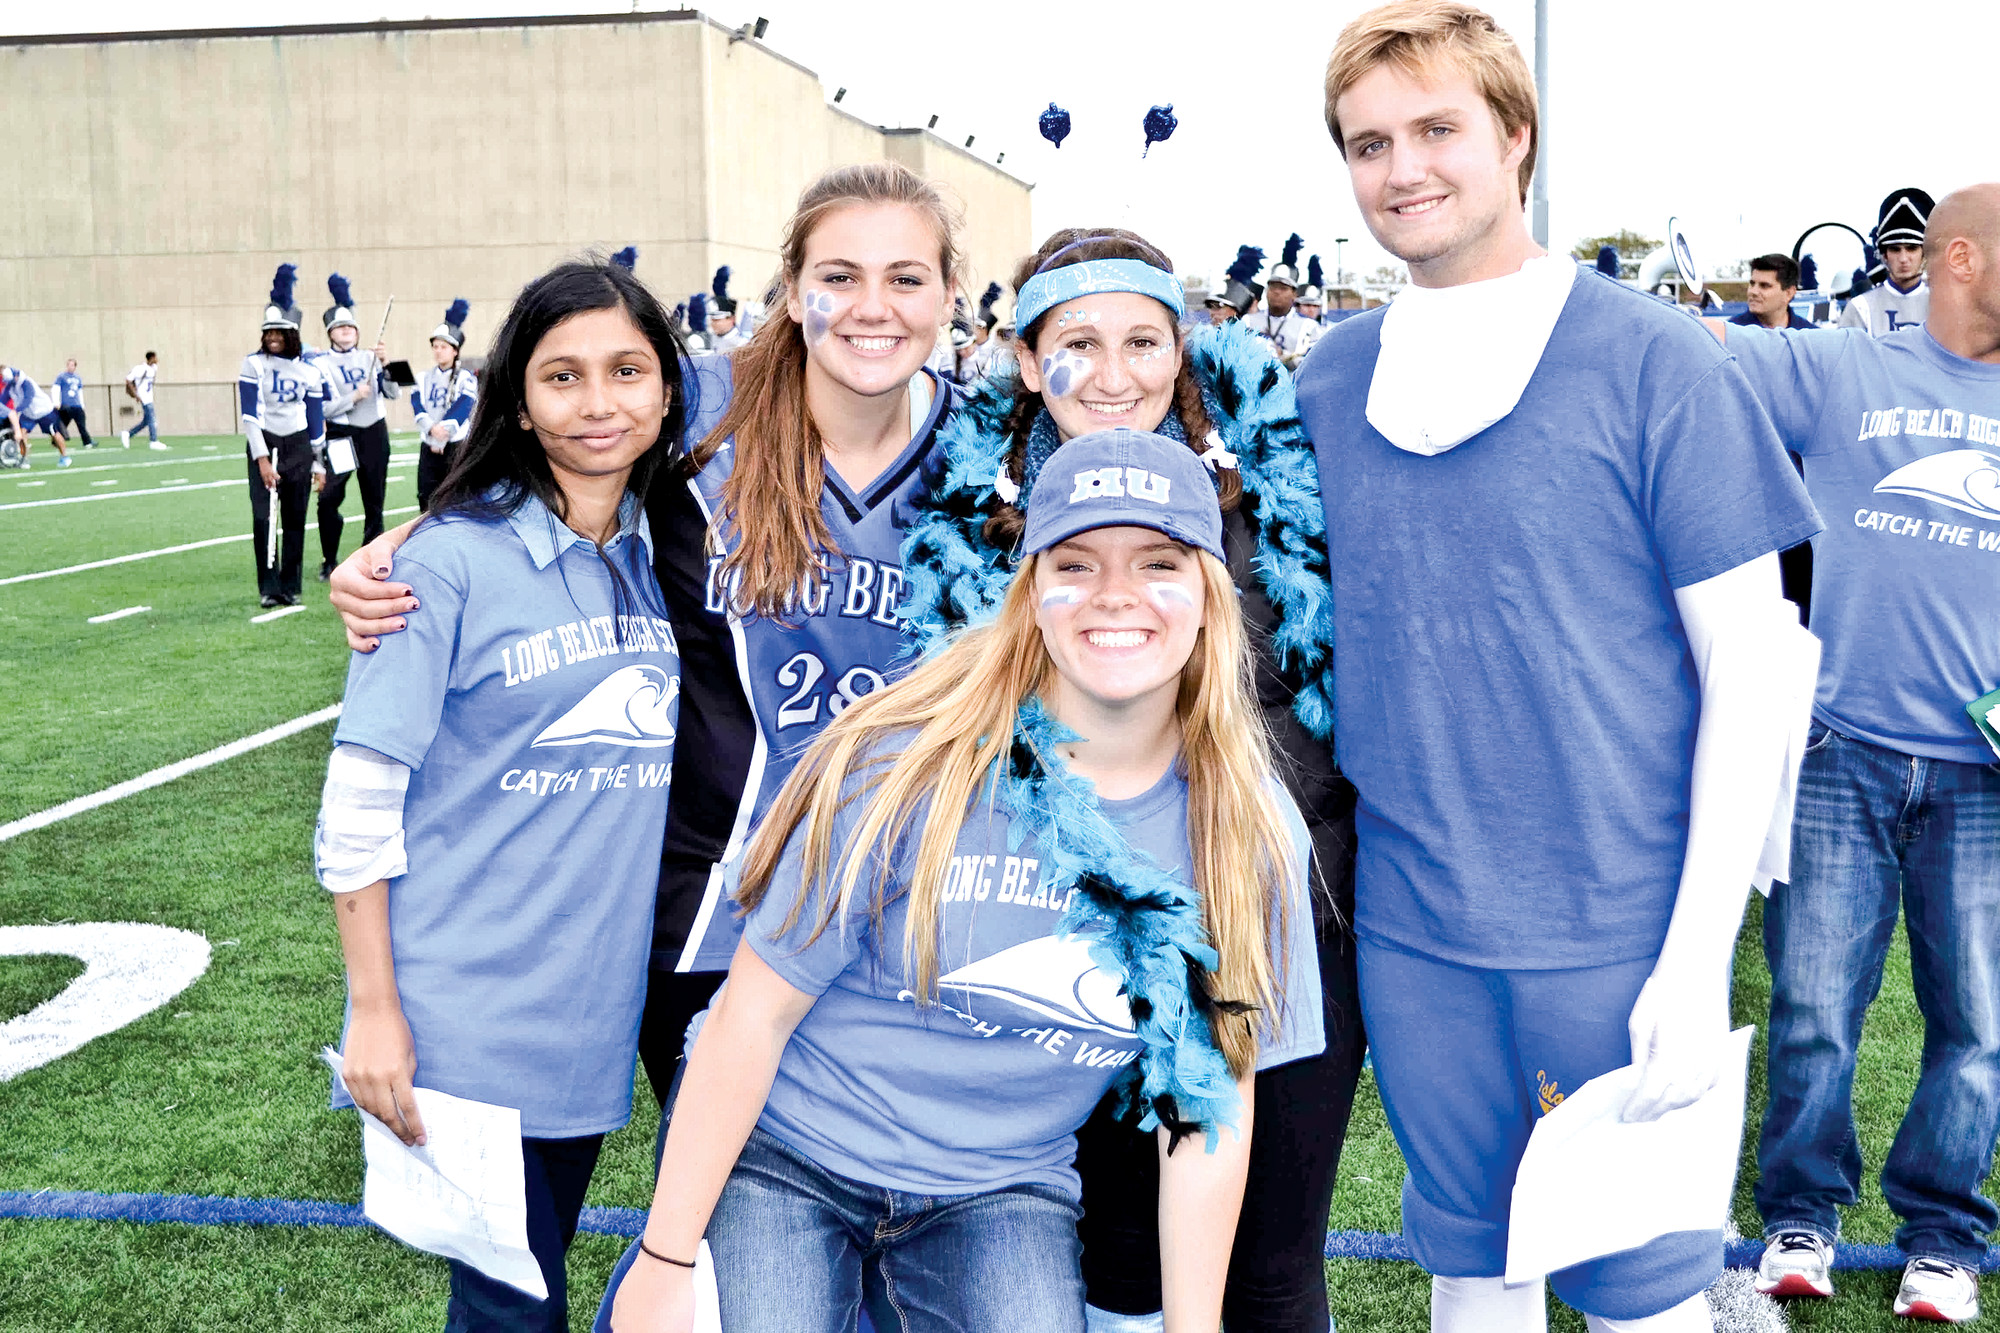 Long Beach High School celebrated its homecoming with a pep rally and football game.